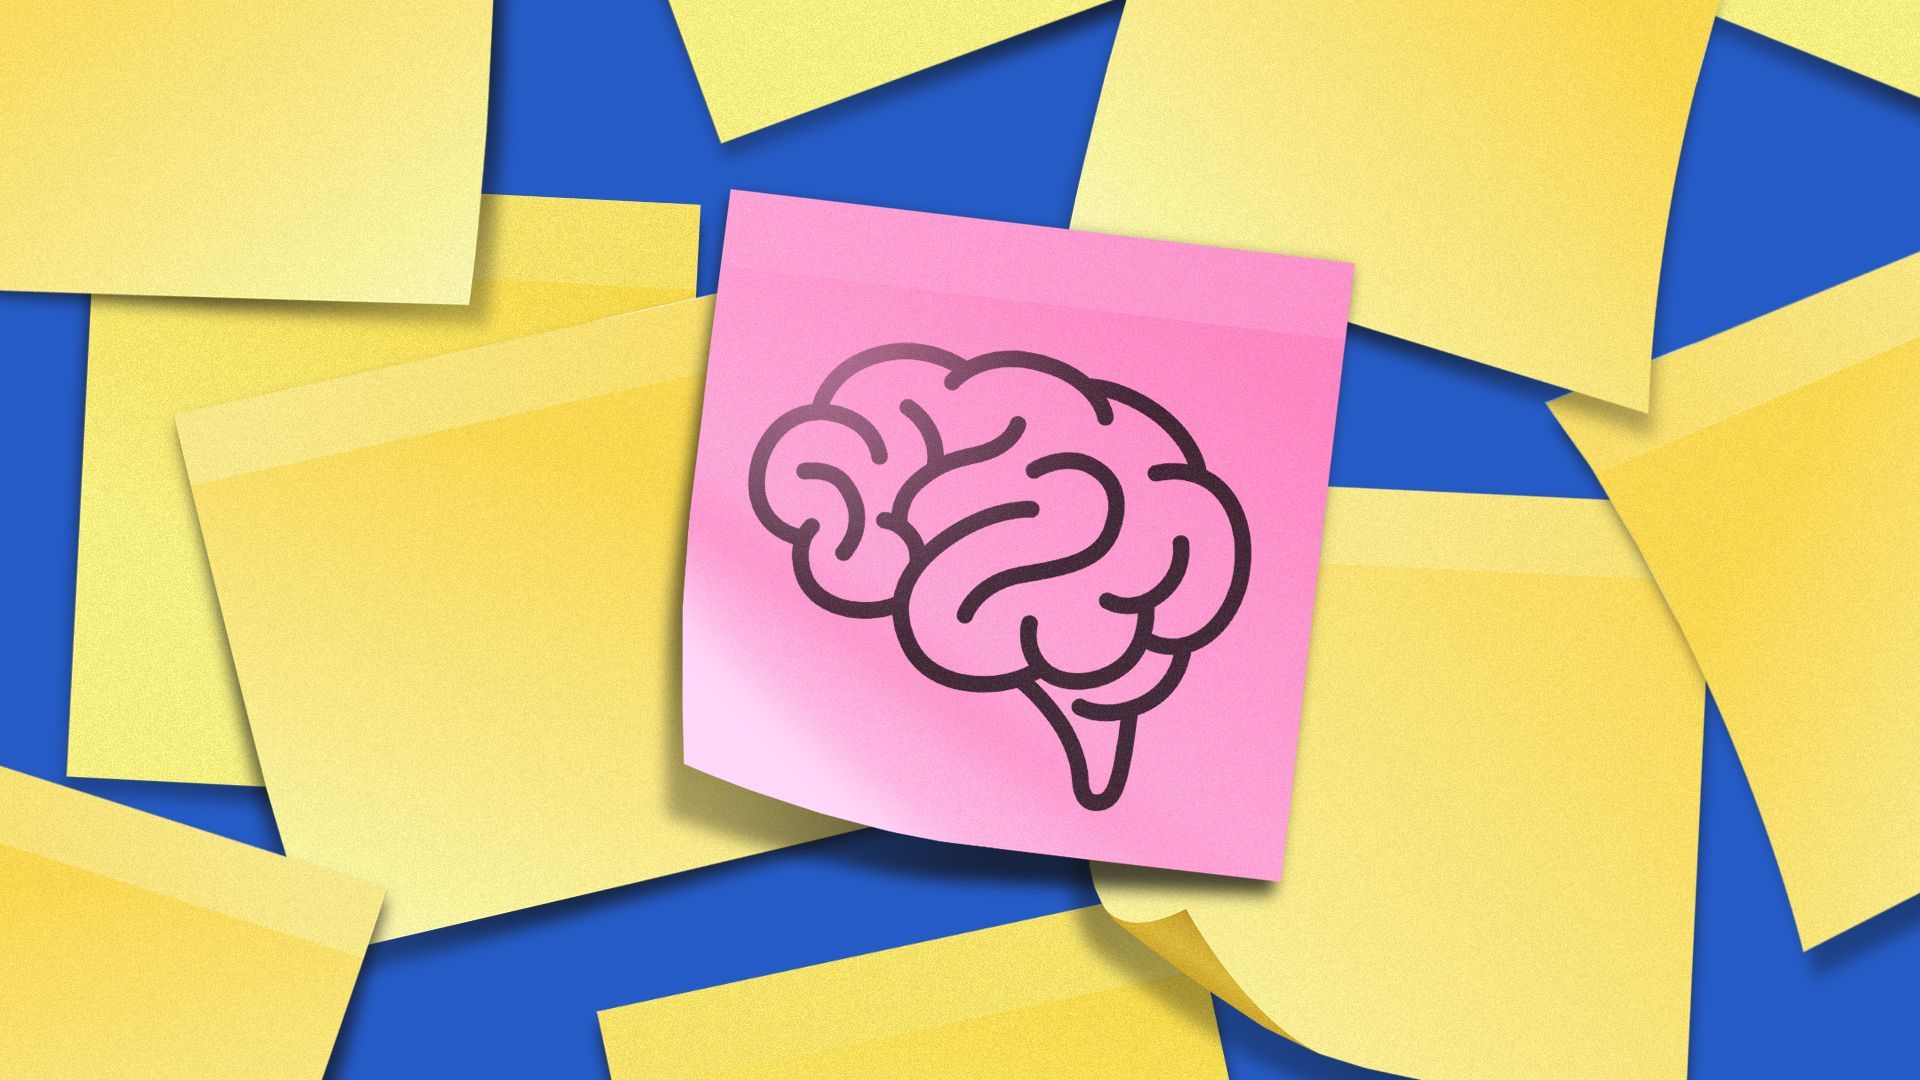 Illustration of many yellow sticky notes with a pink one in the center with a brain on it